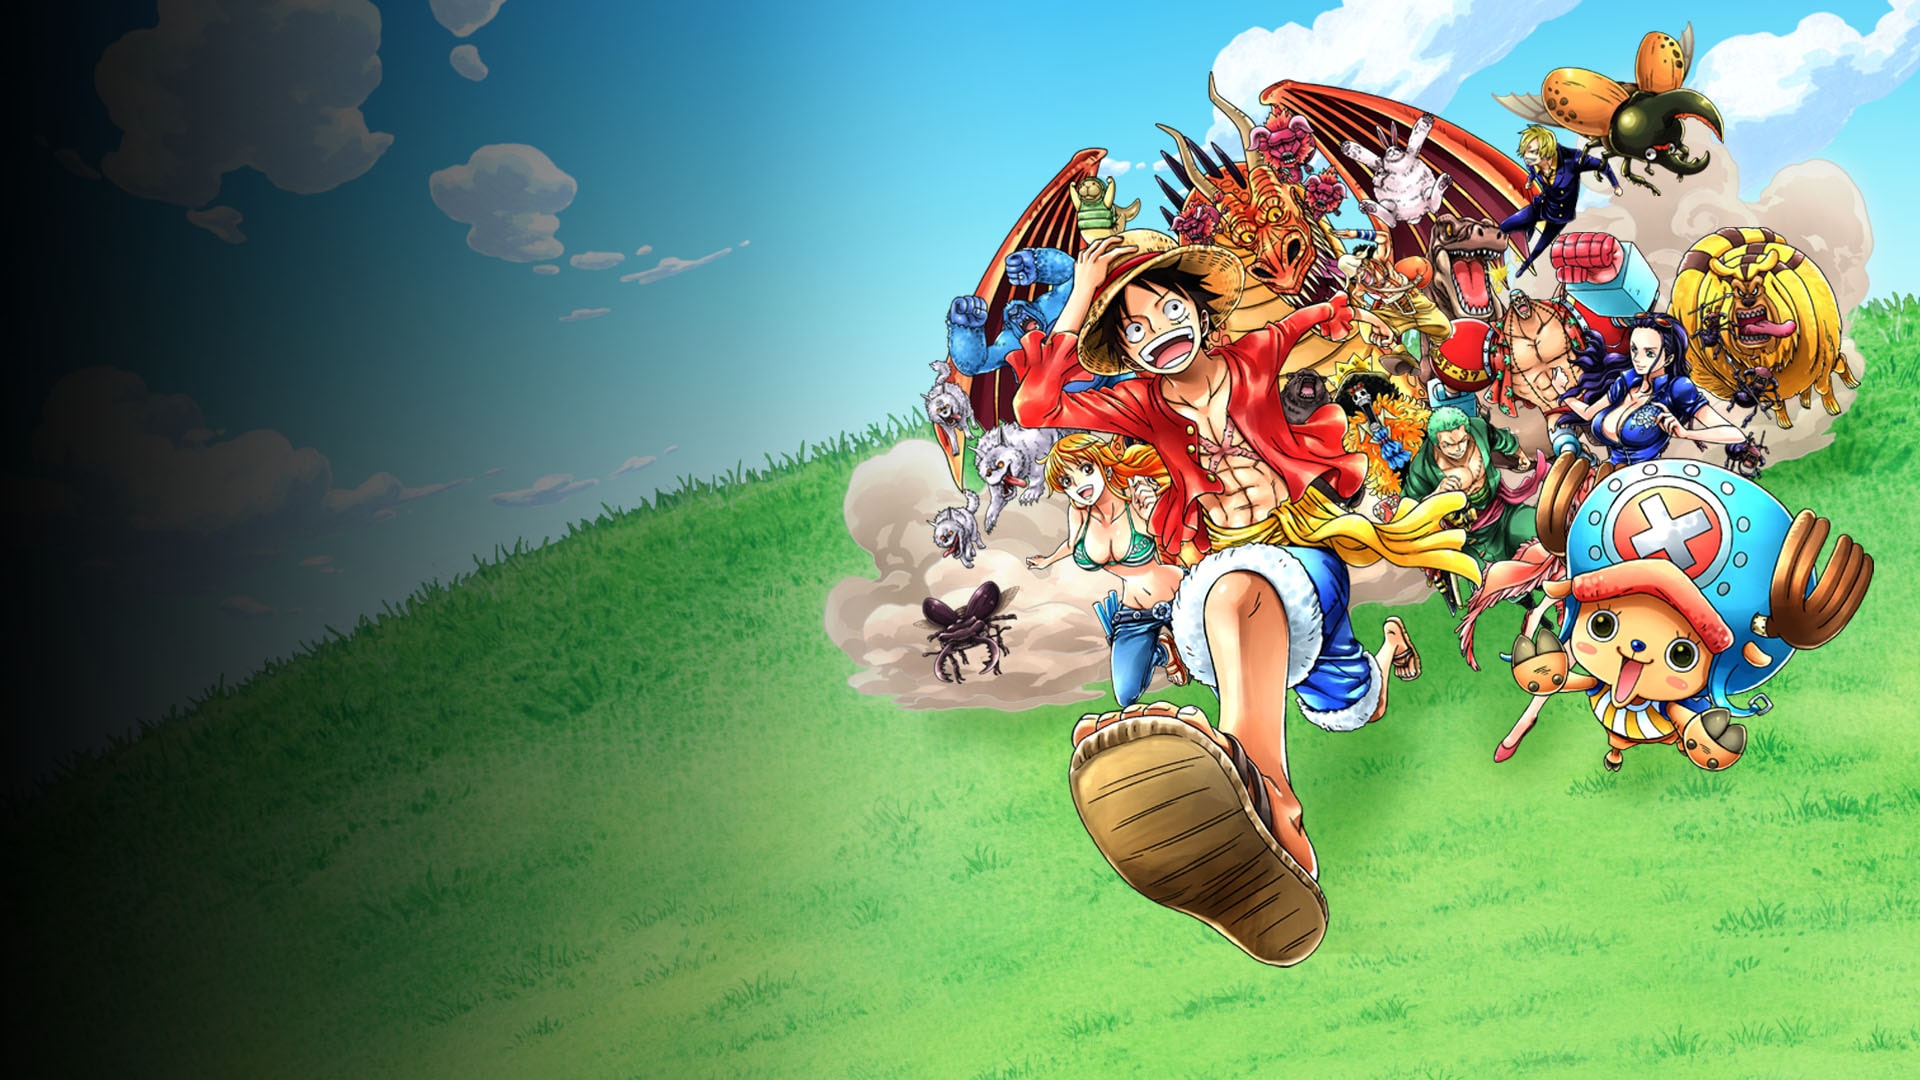 ONE PIECE: Unlimited World Red Deluxe Edition